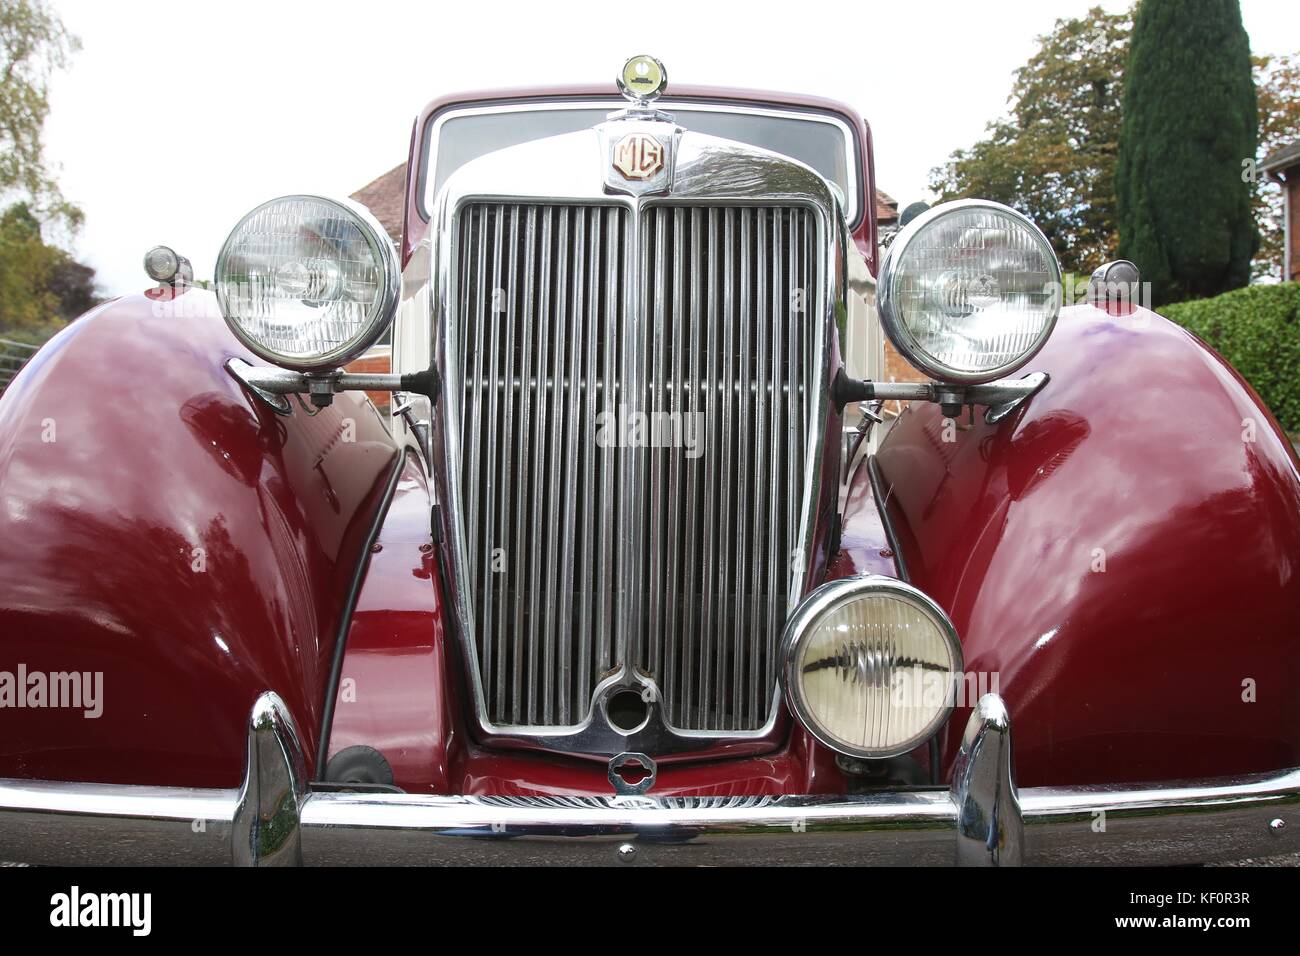 1953 MG YB 1.25 XPAG Engine  Picture by Antony Thompson Stock Photo